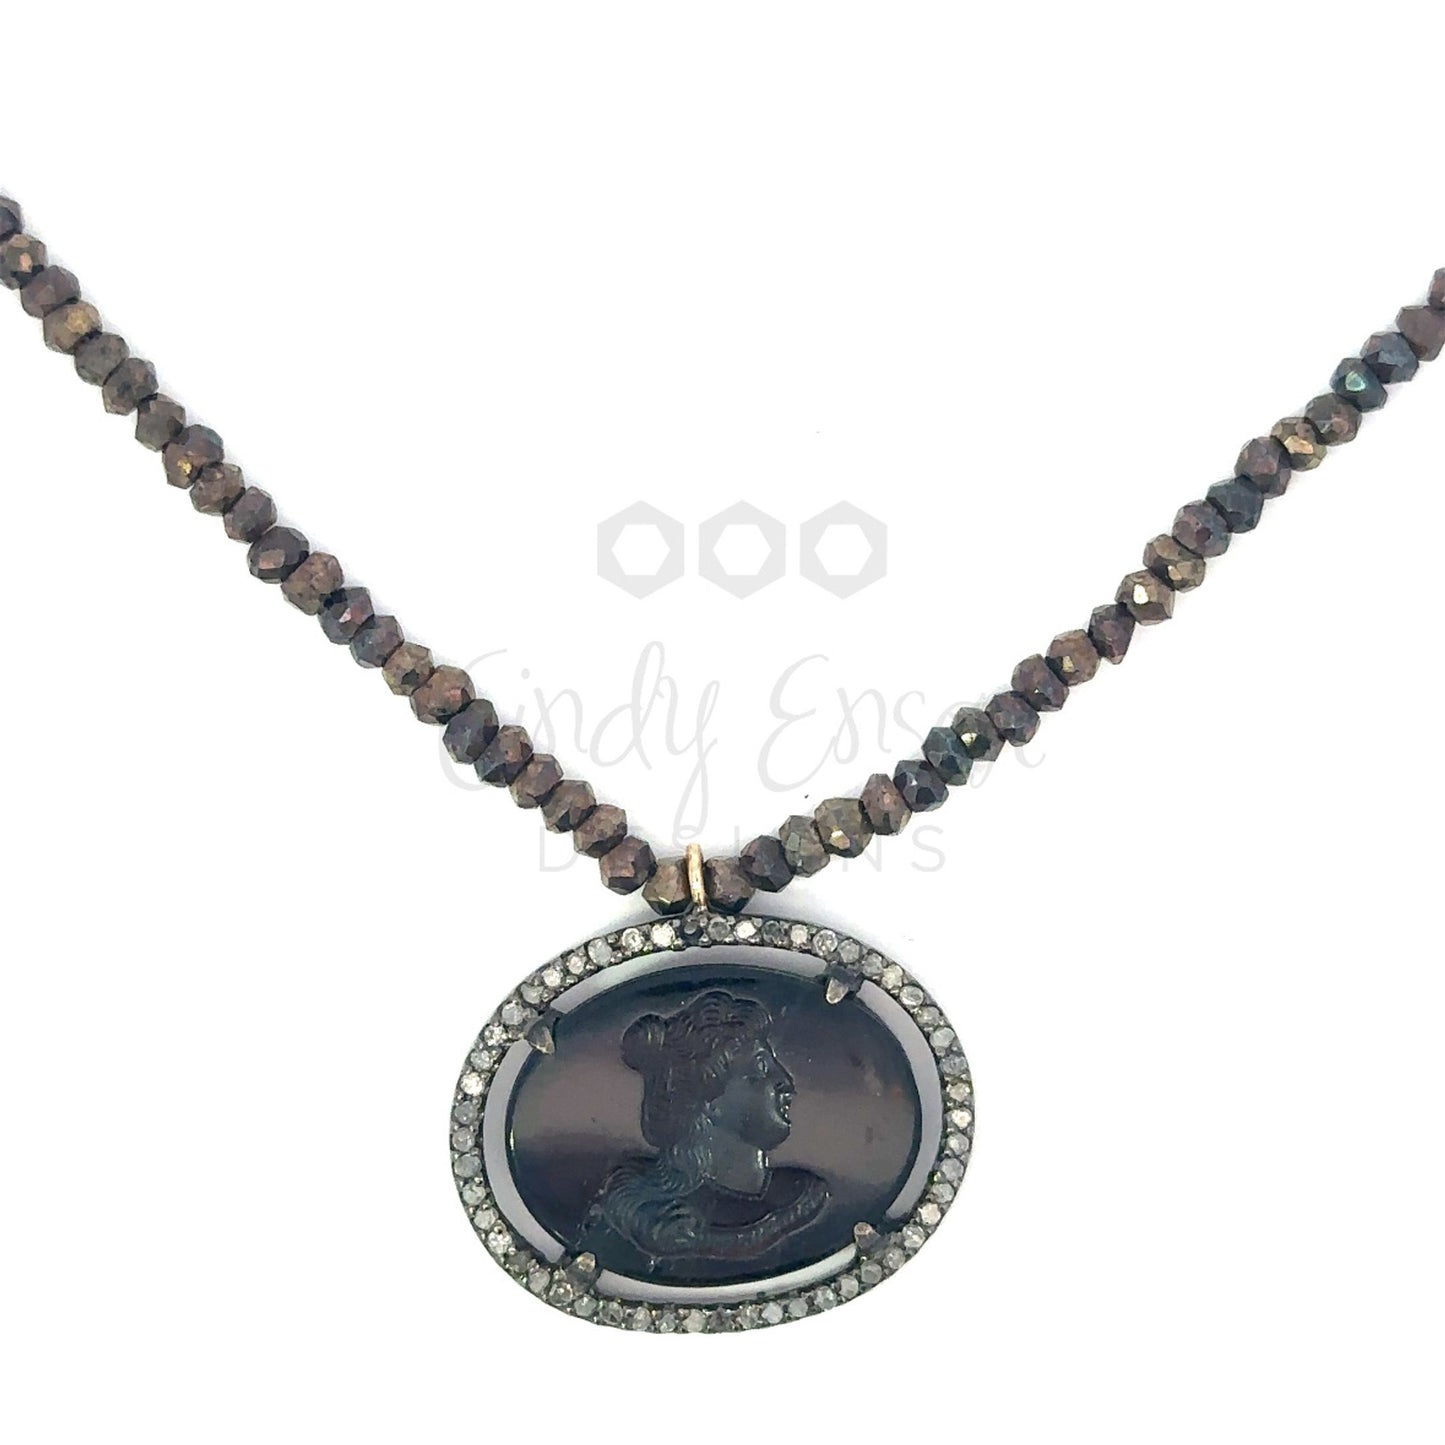 Amber Oval Cameo Necklace with Pave Diamond Border